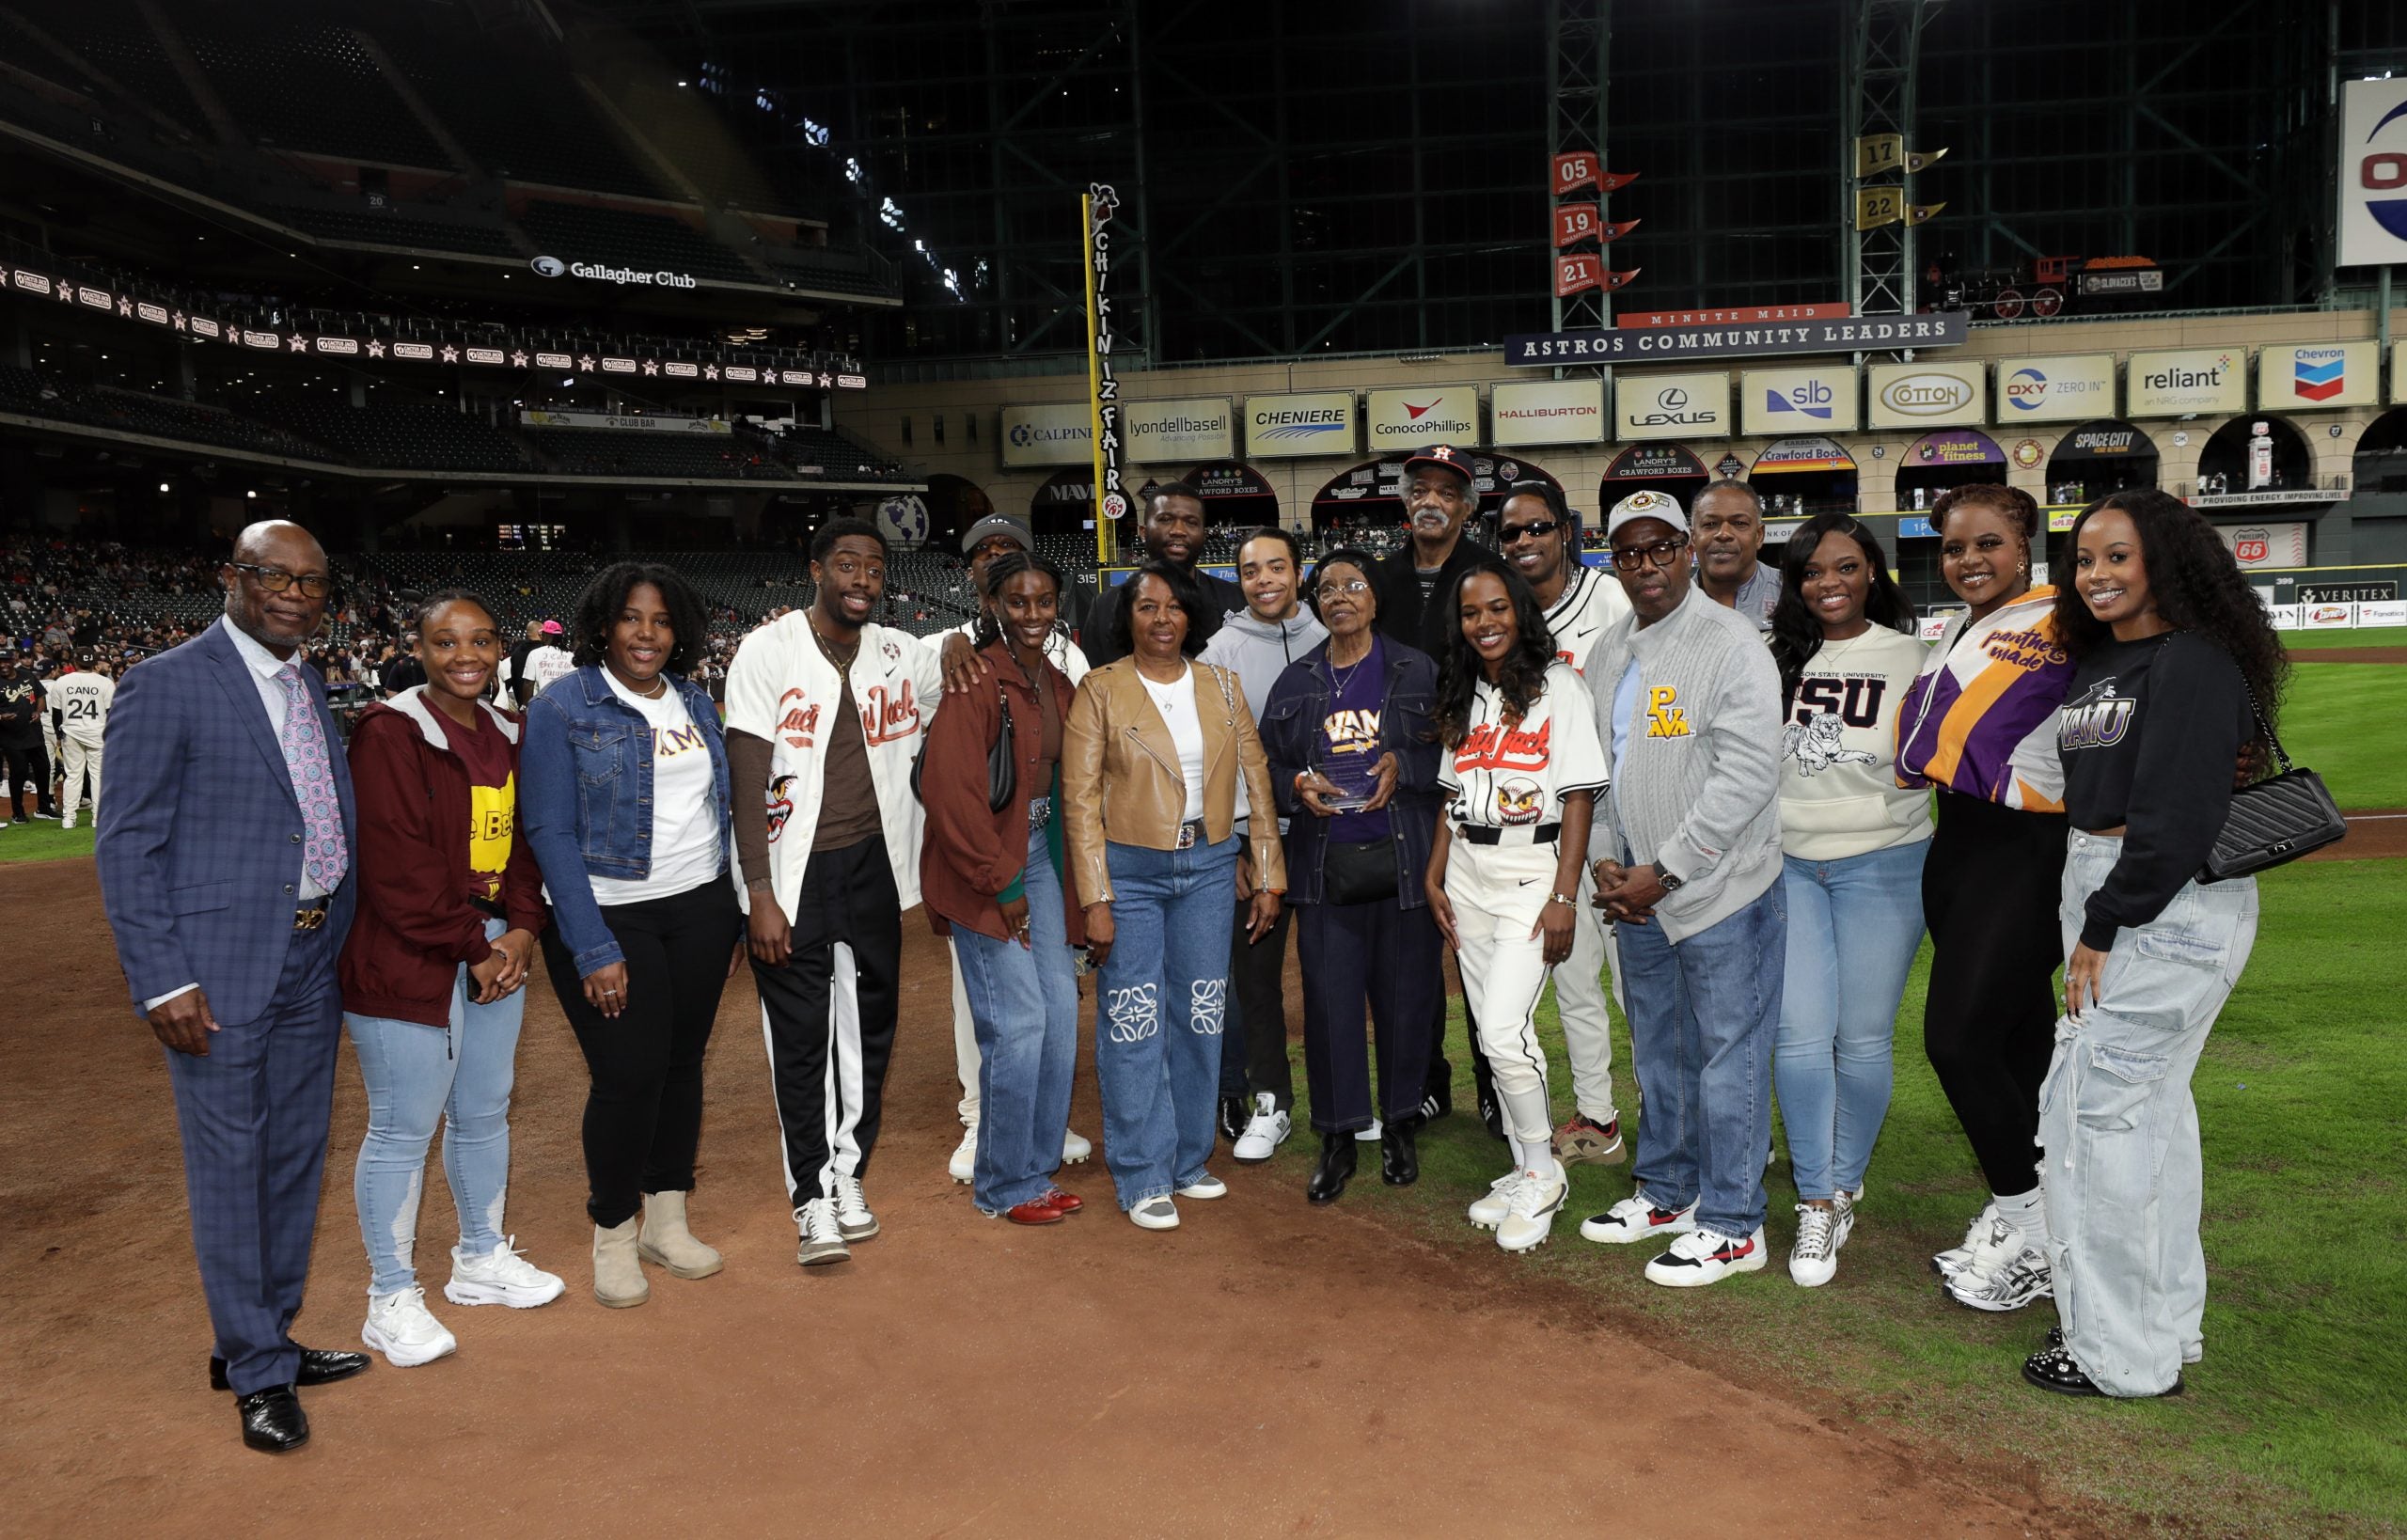 The Cactus Jack Foundation Championed HBCUs With Celeb Softball Game